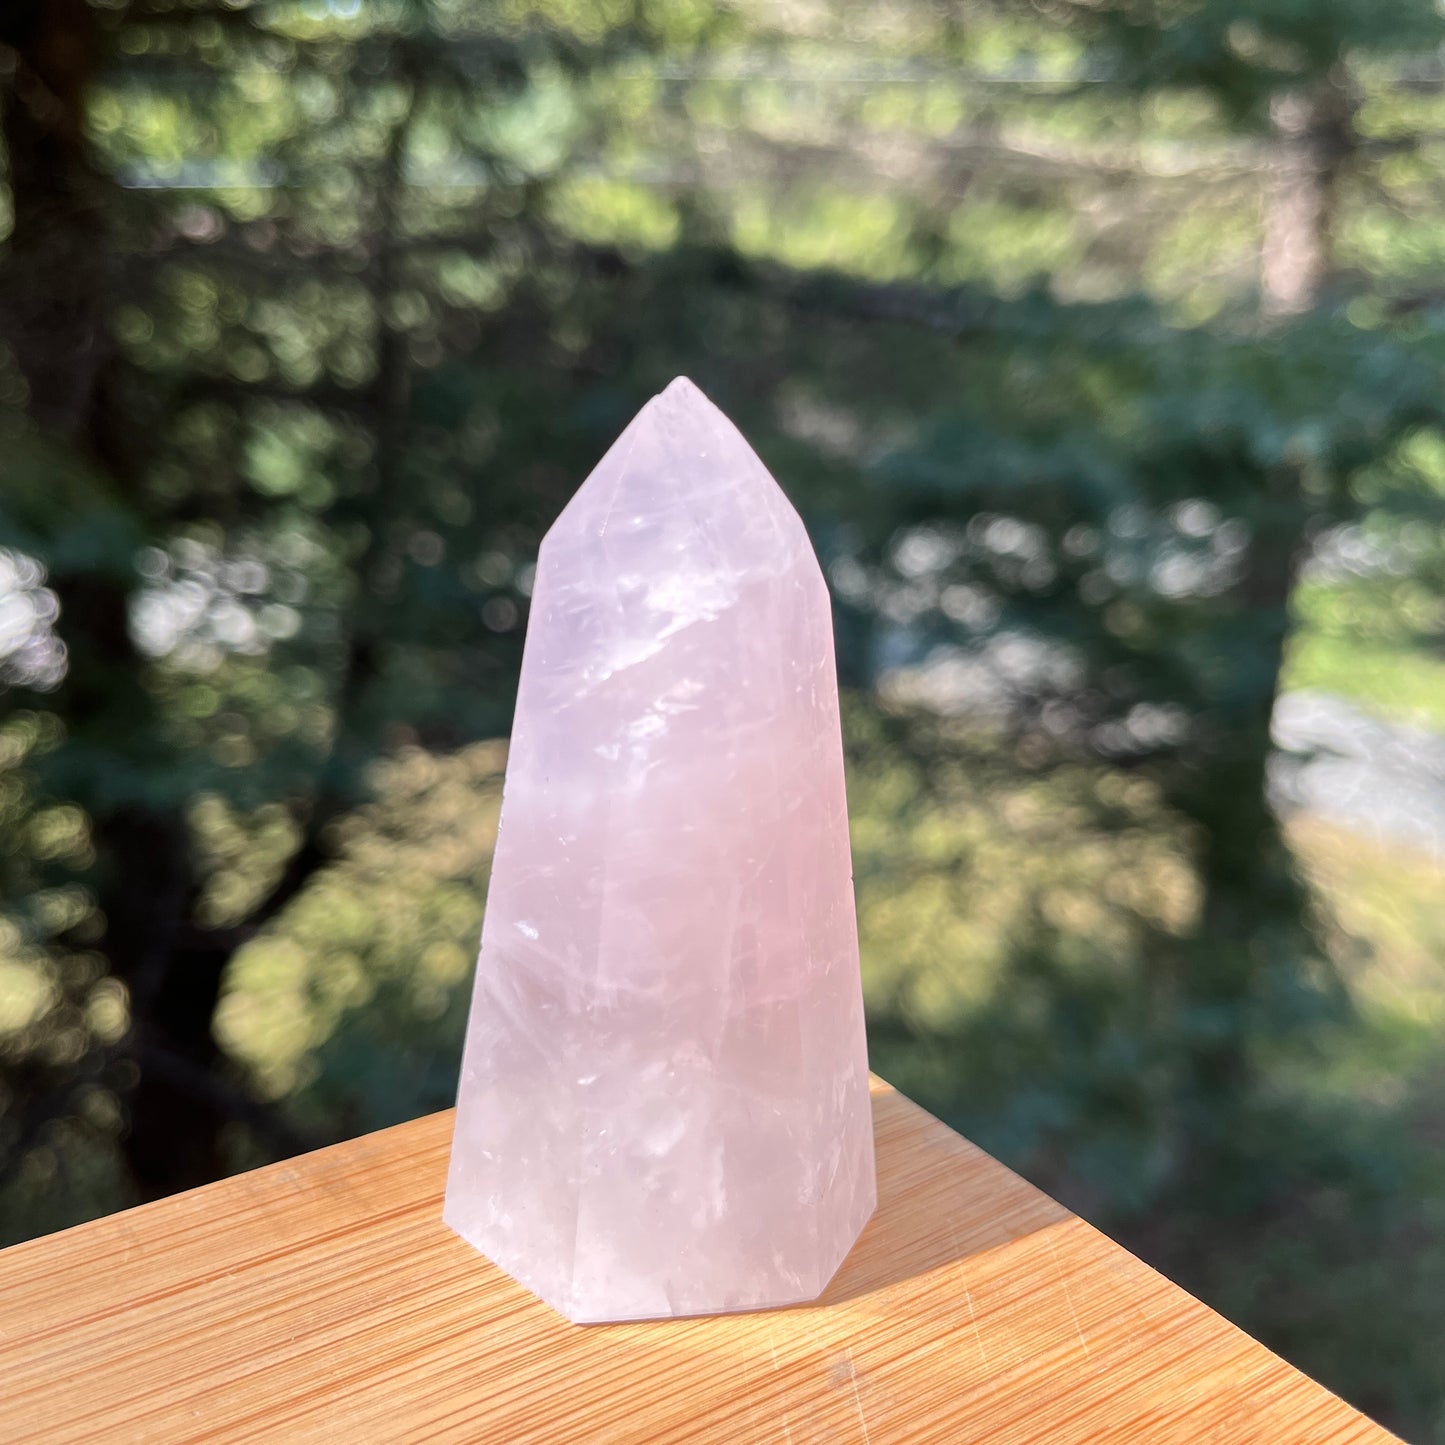 Crystal point for crystal grids and healing.